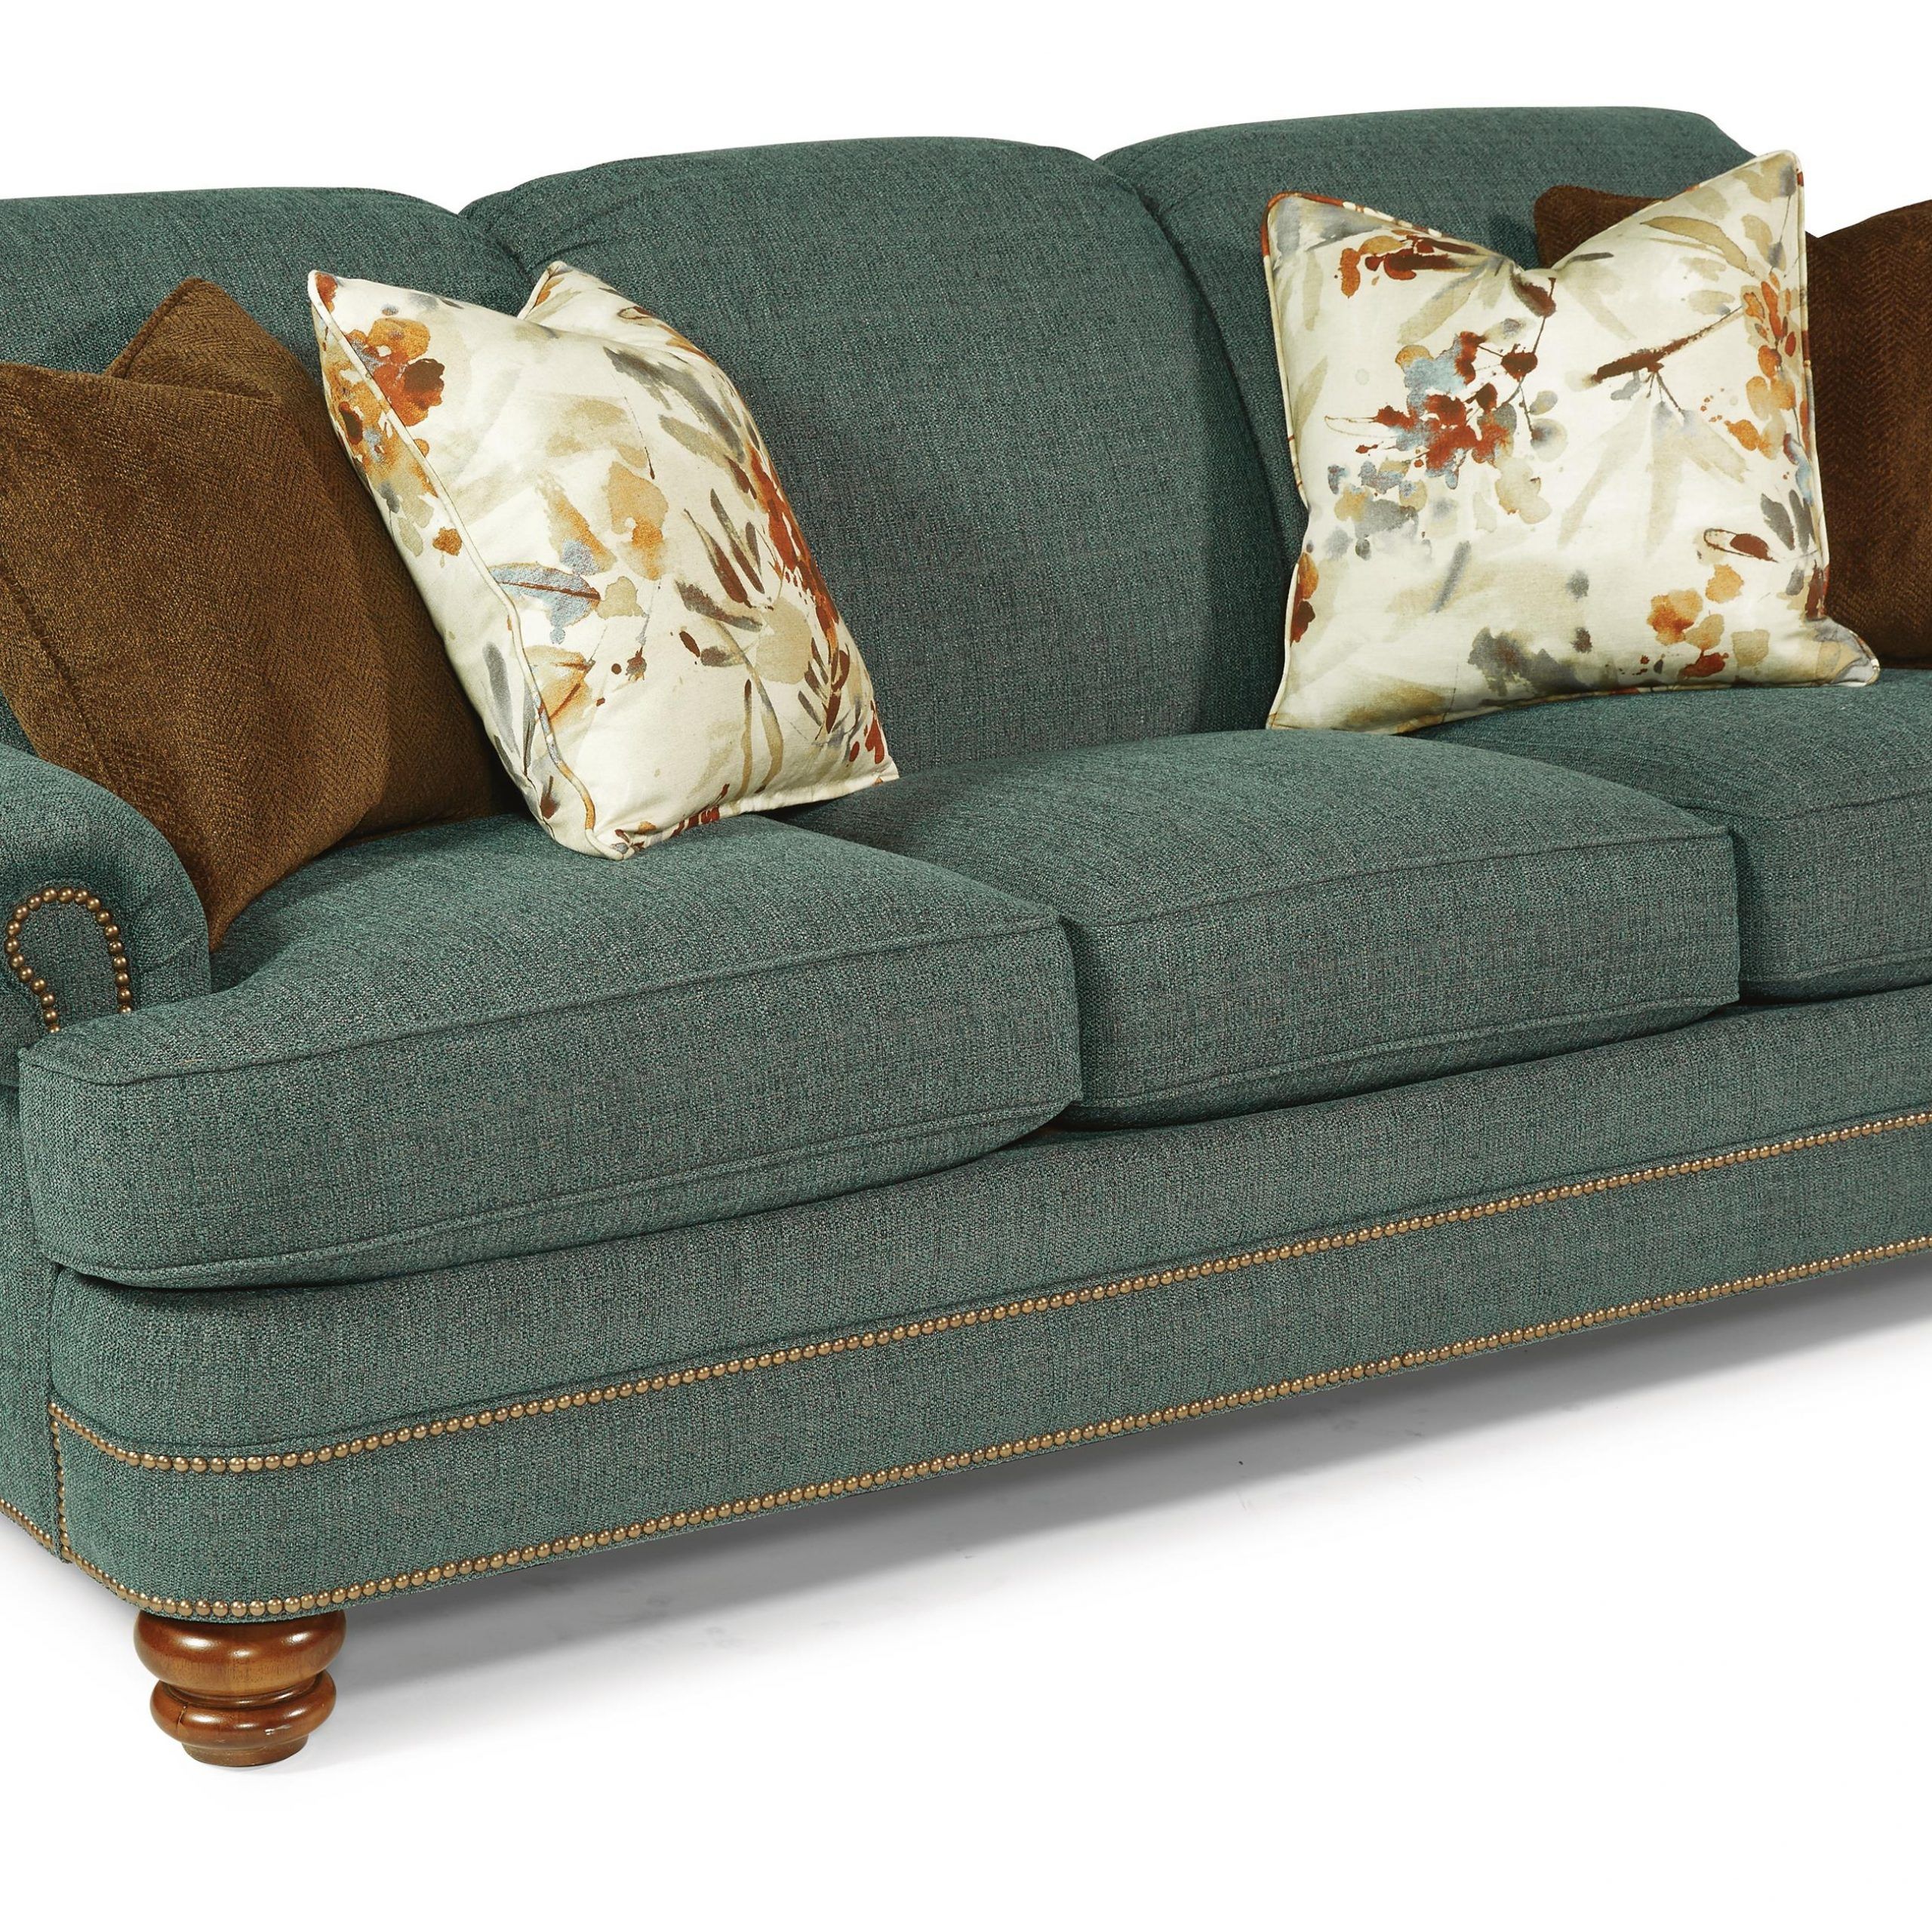 Flexsteel Bay Bridge 7791 31 Traditional Rolled Back Sofa Intended For Traditional Sofas And Chairs (View 5 of 15)